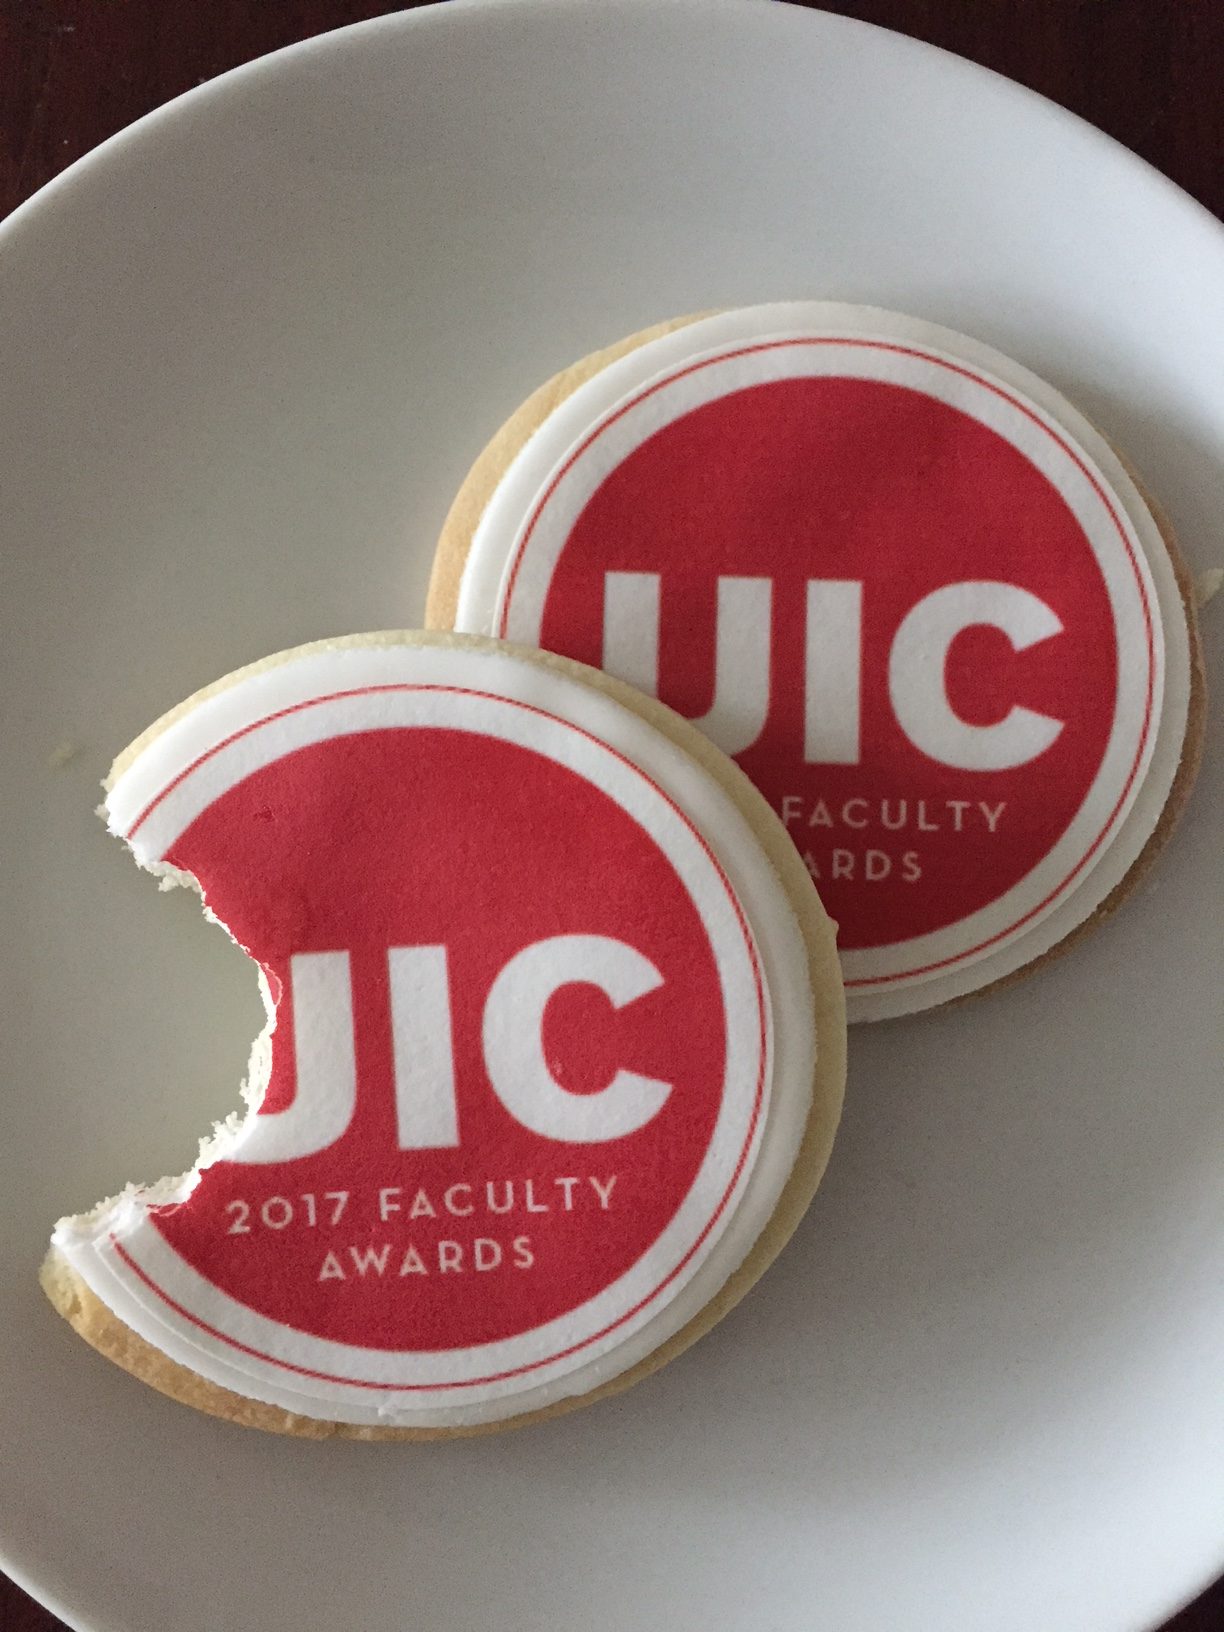 cookies with UIC faculty awards celebration logo
                  